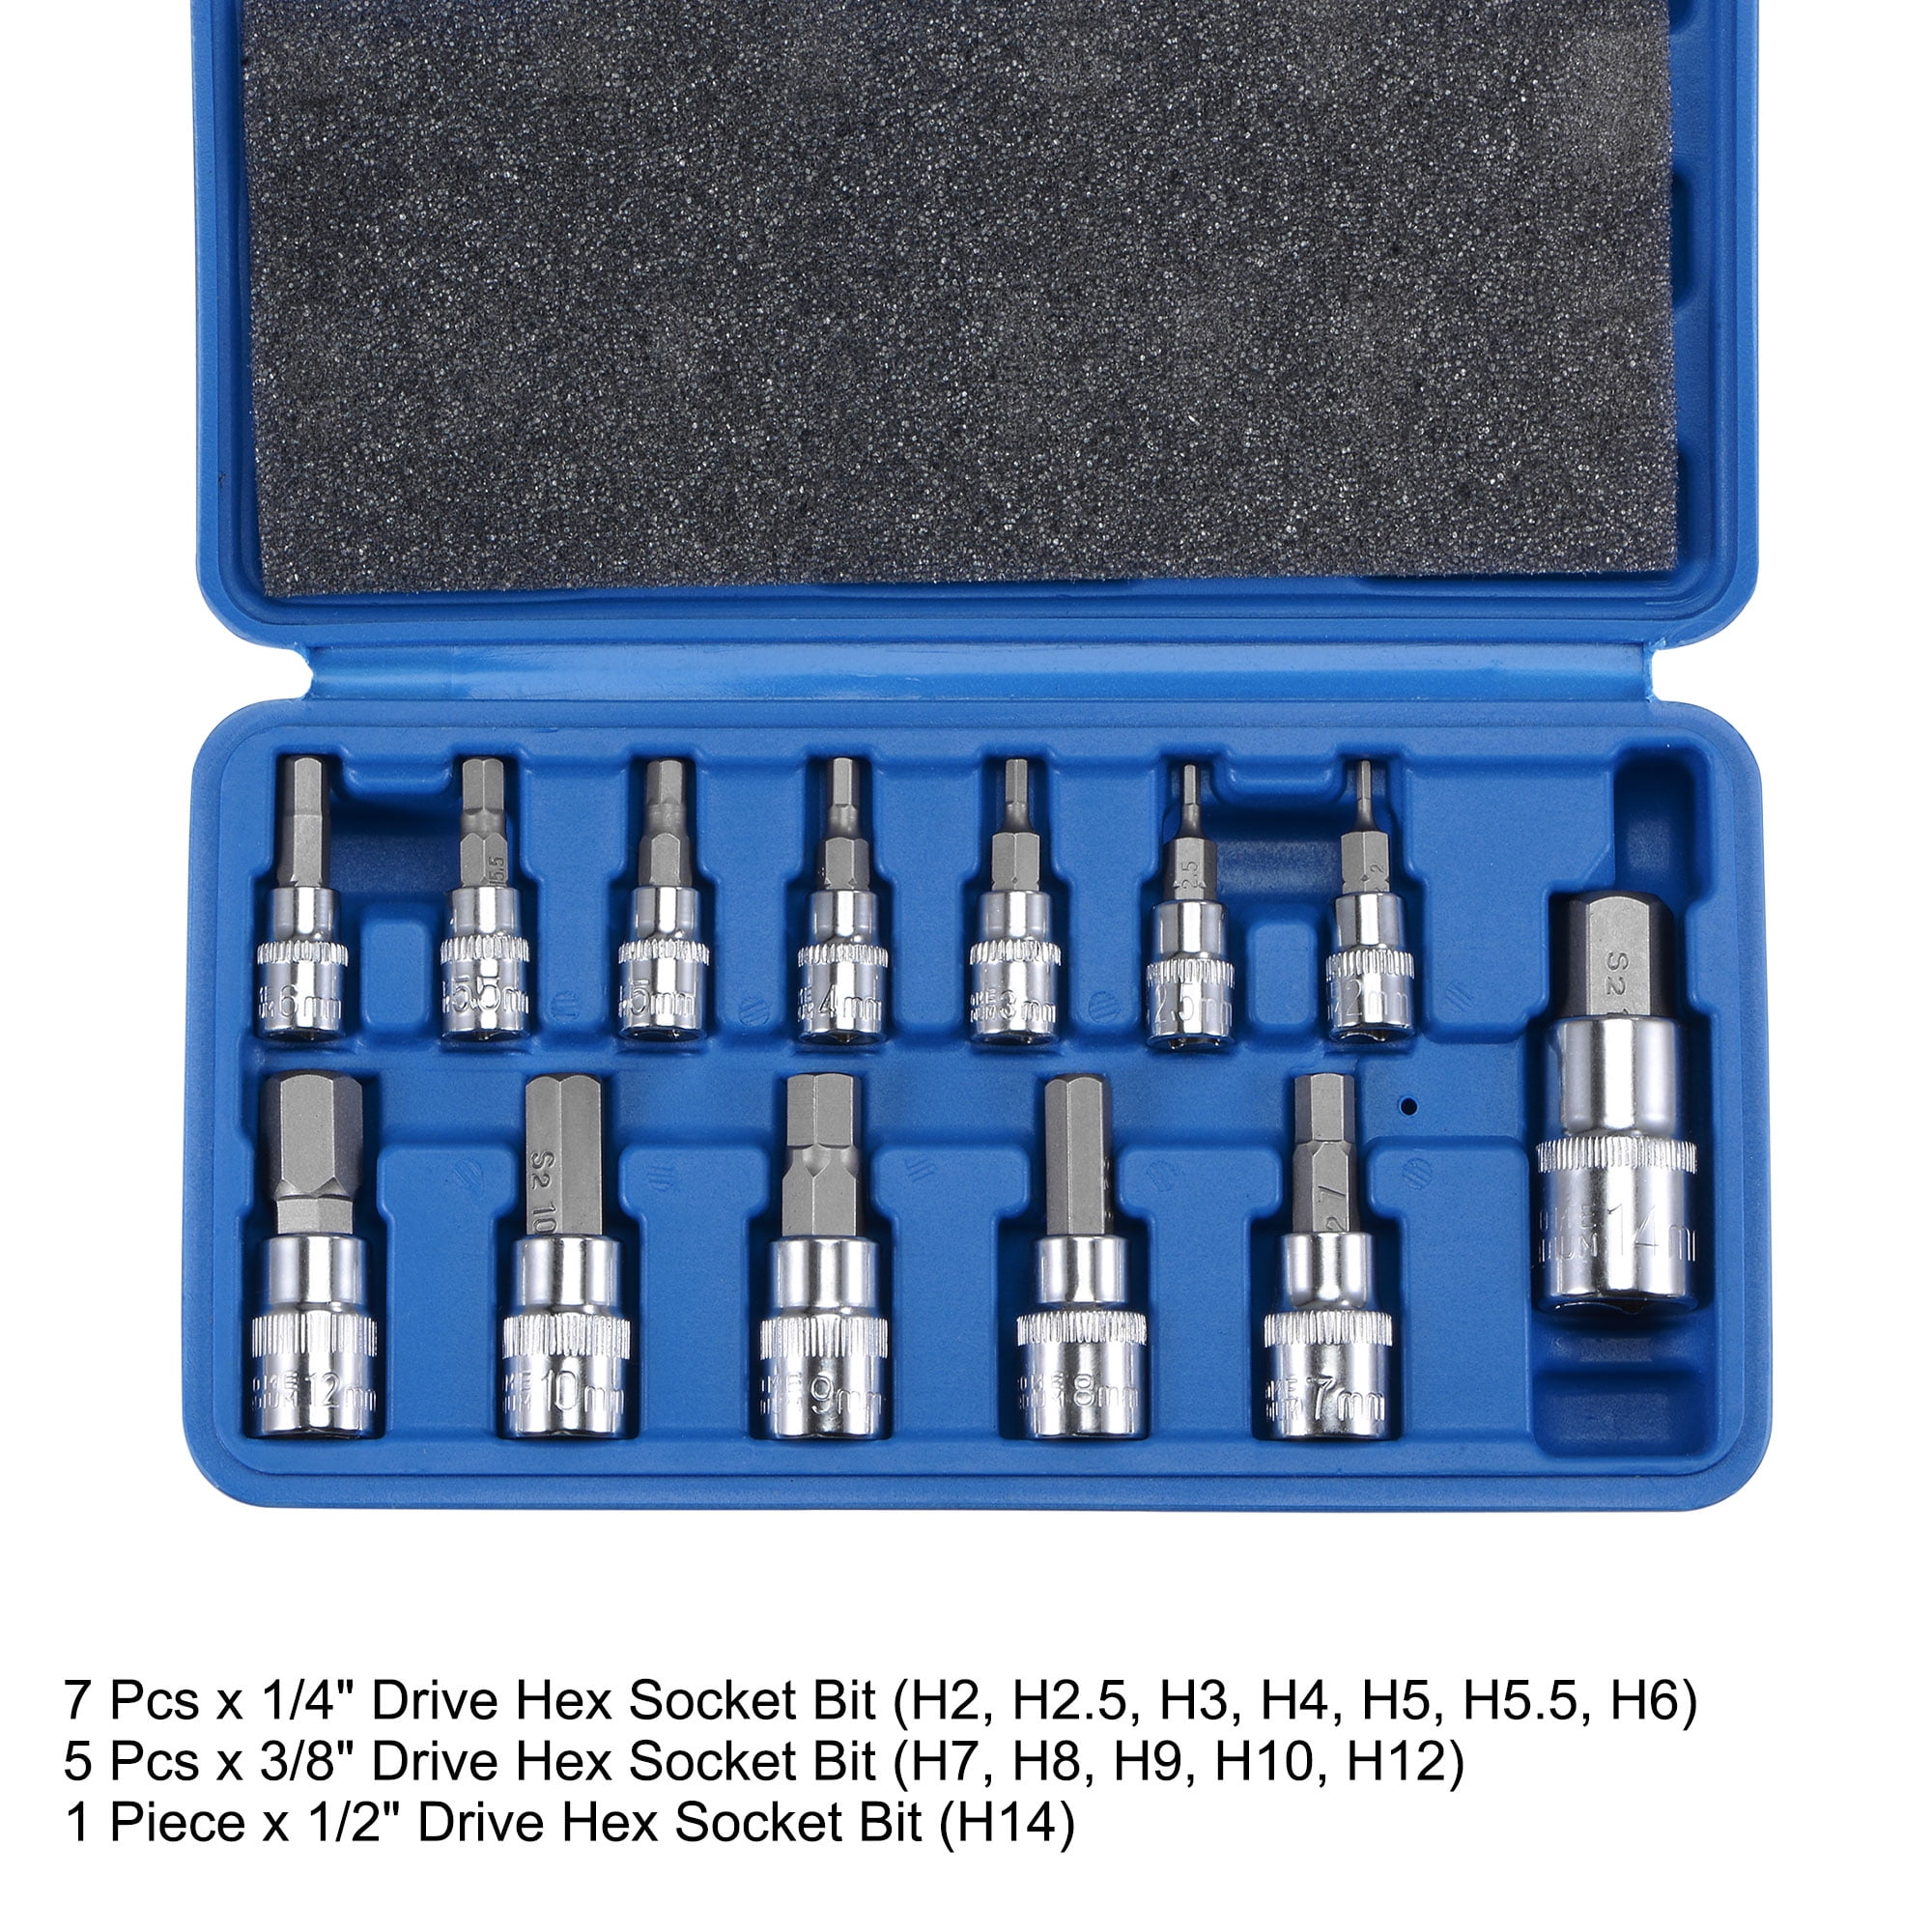 uxcell 1/2-Inch Drive Socket and Bit Set H4 H5 H6 H7 H8 H10 H12 S2 Steel 15 Pcs 